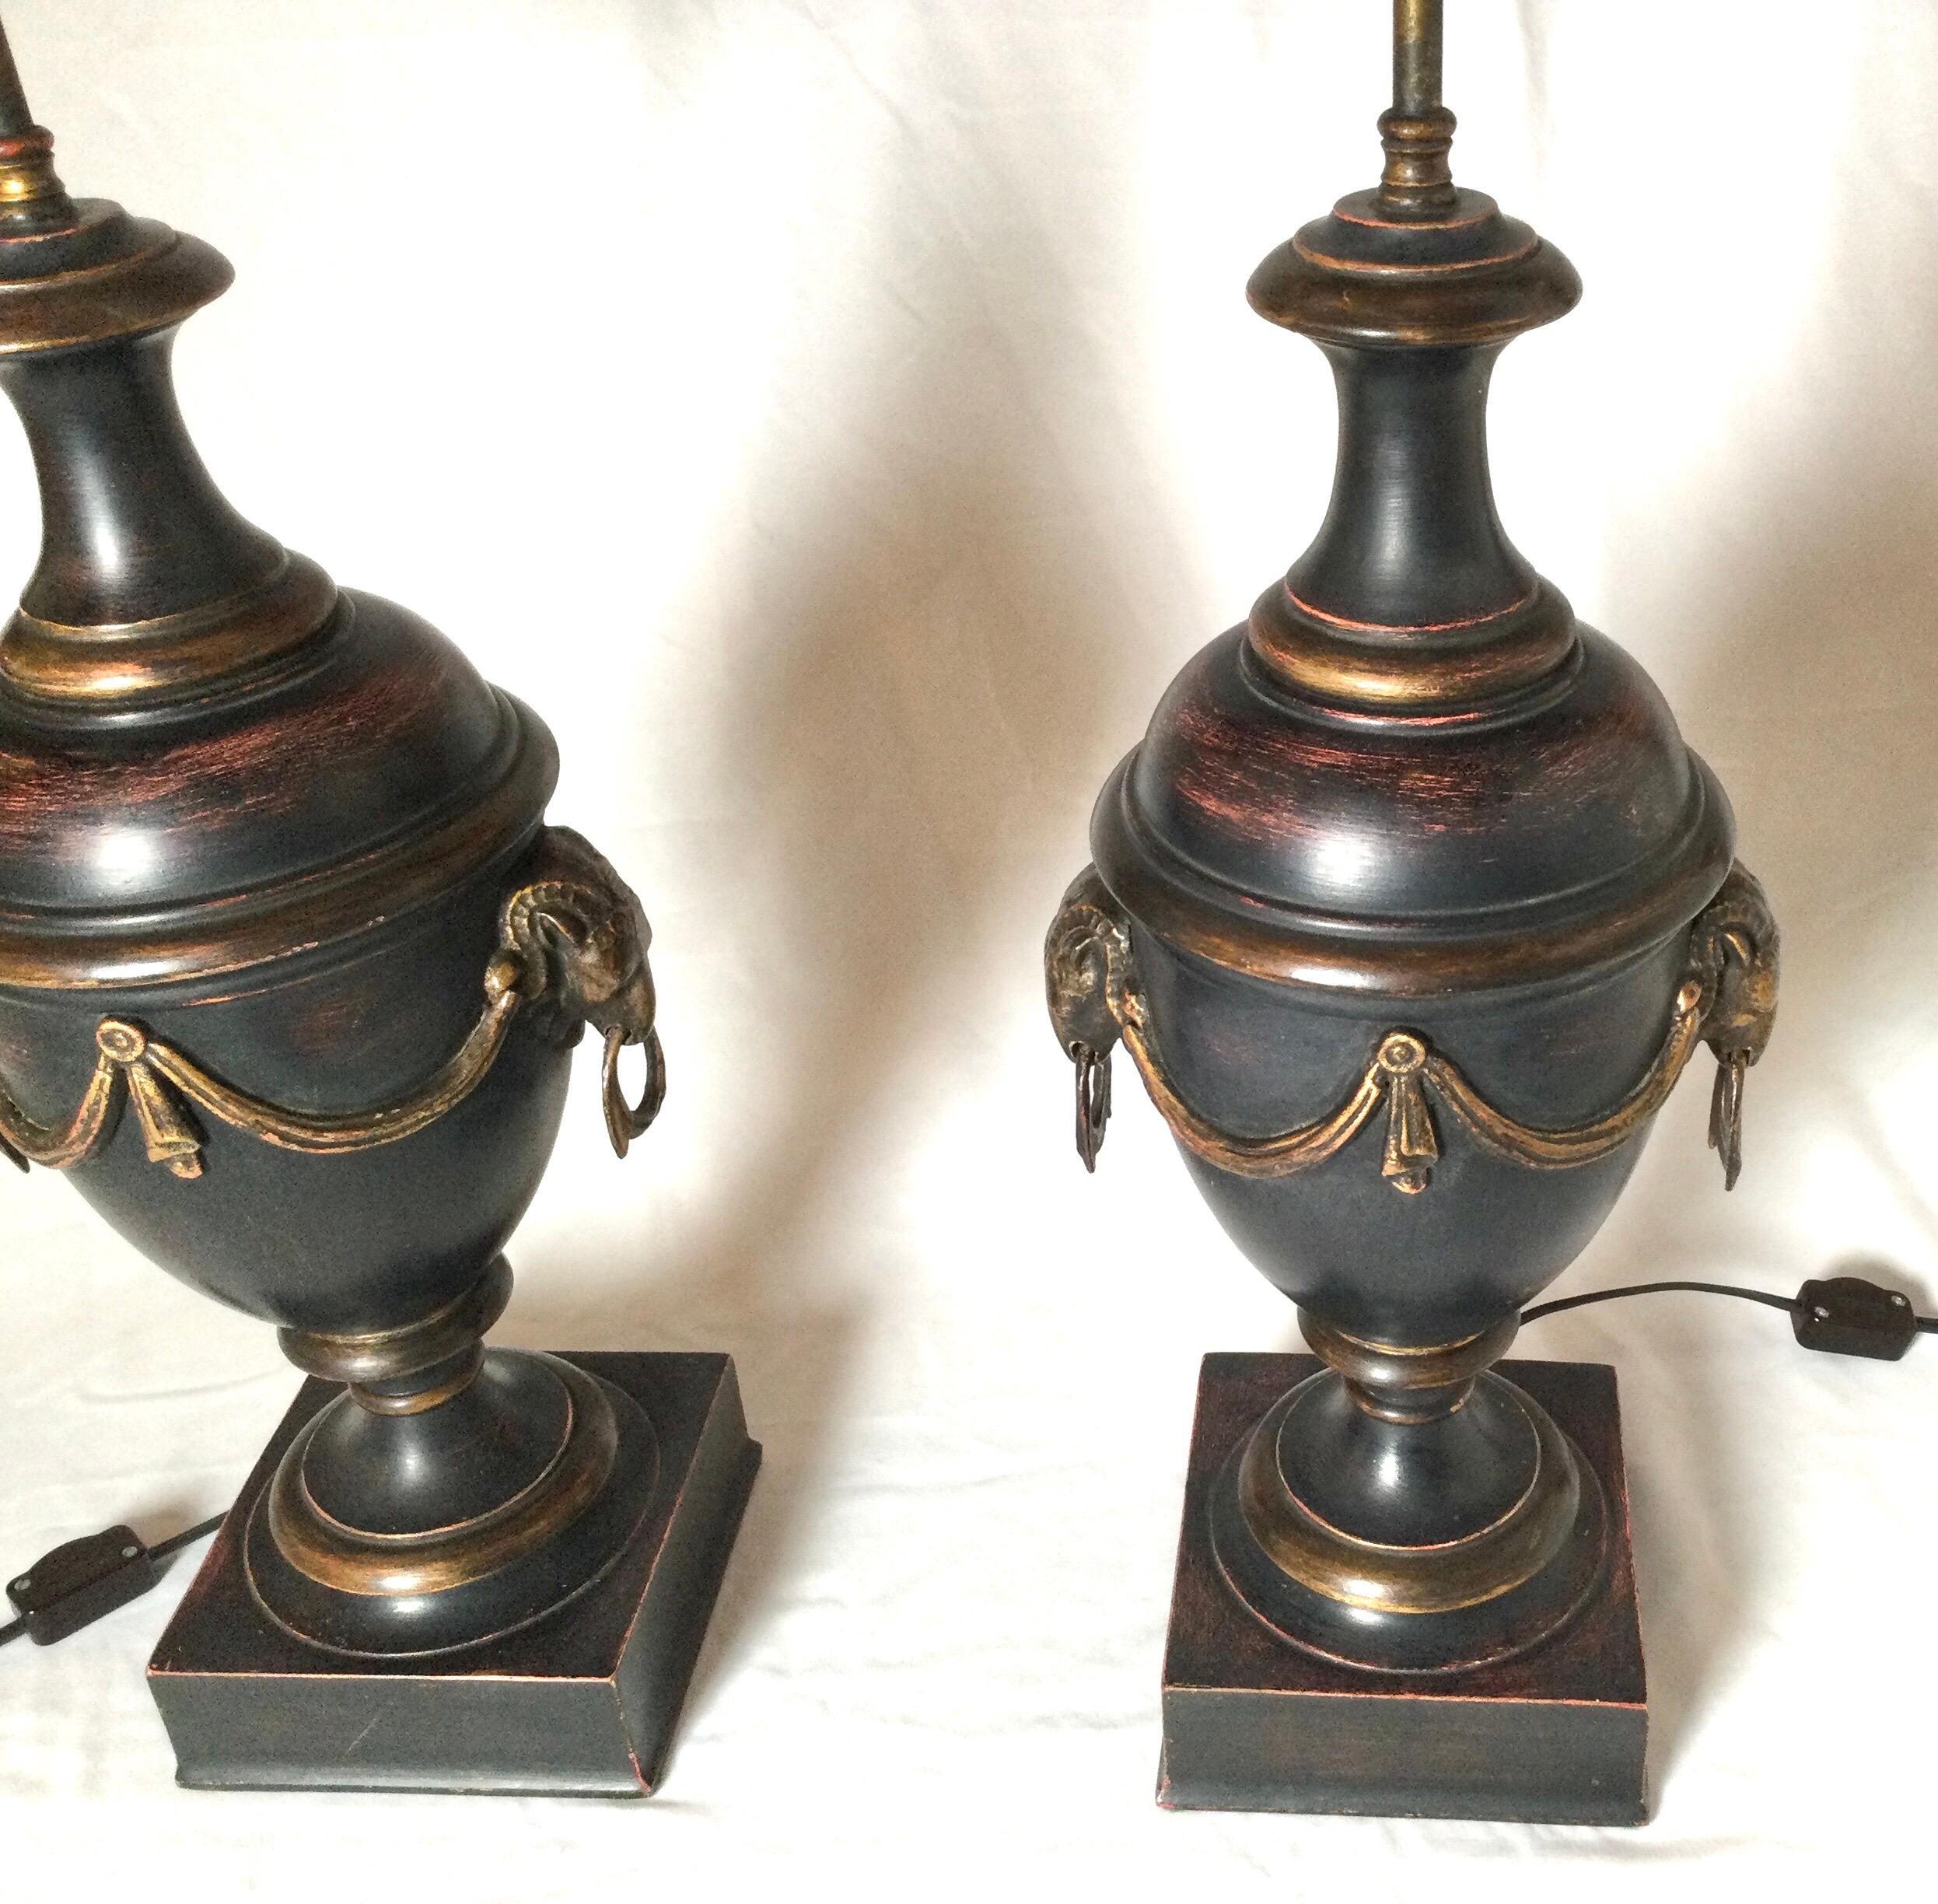 Hand-Painted Pair of Neoclassical Patinated Urn Lamps